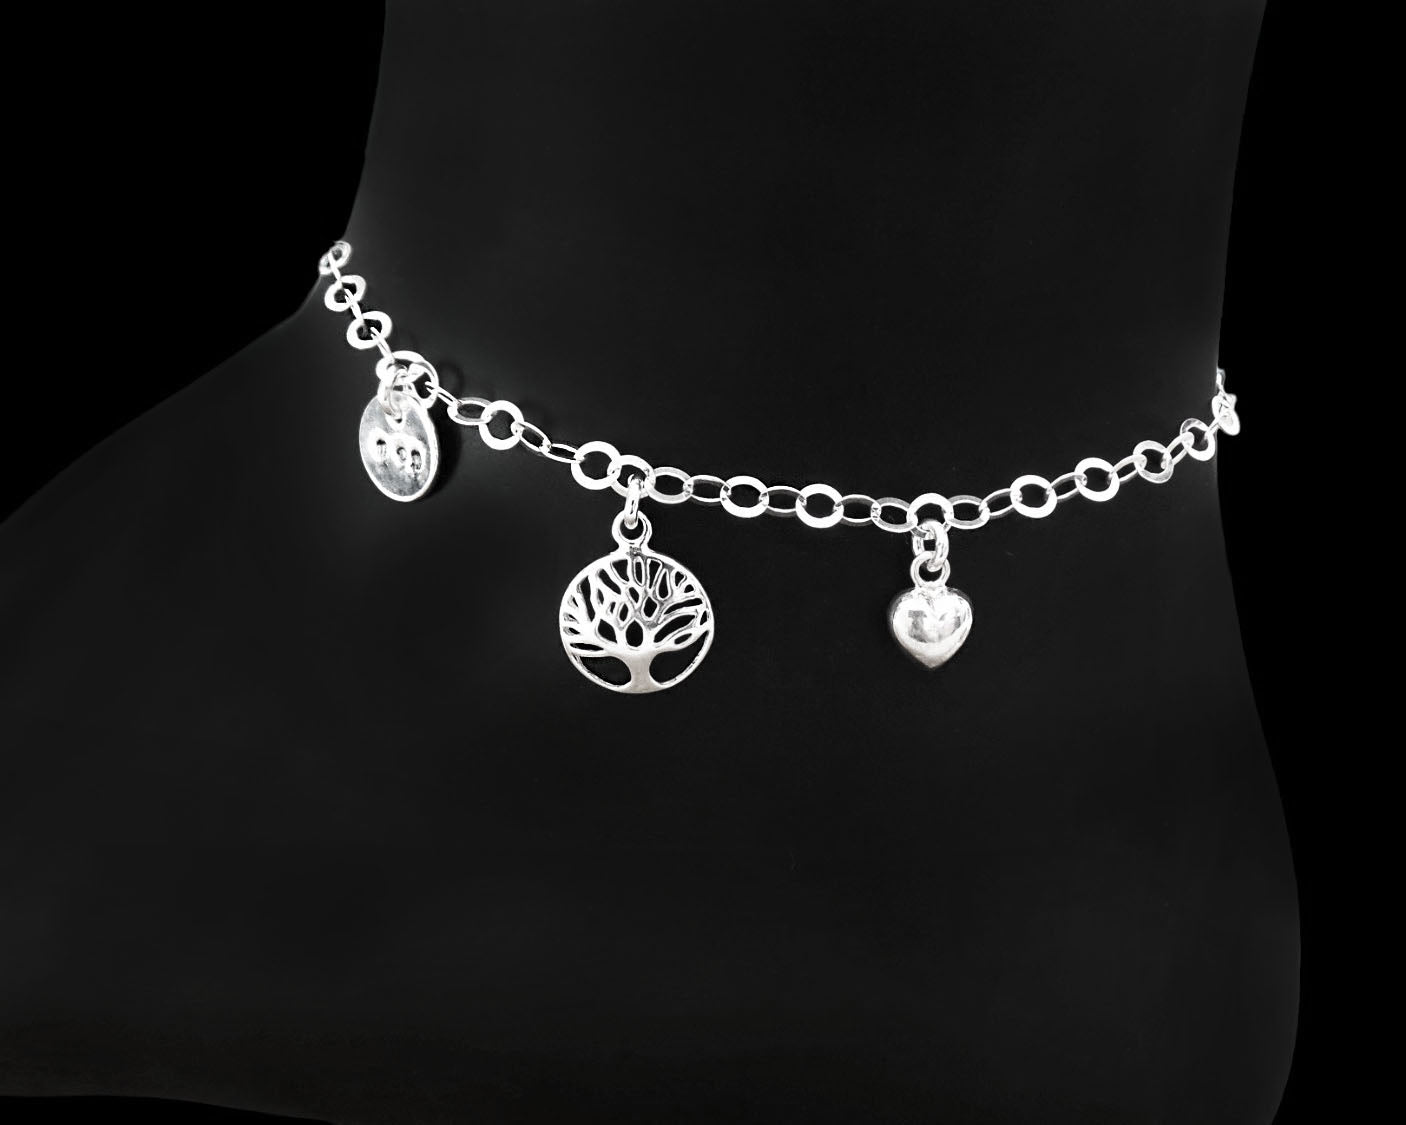 Mother Tree of Life, Heart, Mom Ankle Bracelet / Anklet, Sterling Silver Chain anklet with Tree of Life and Heart Pendant featuring a hand stamped MOM pendant